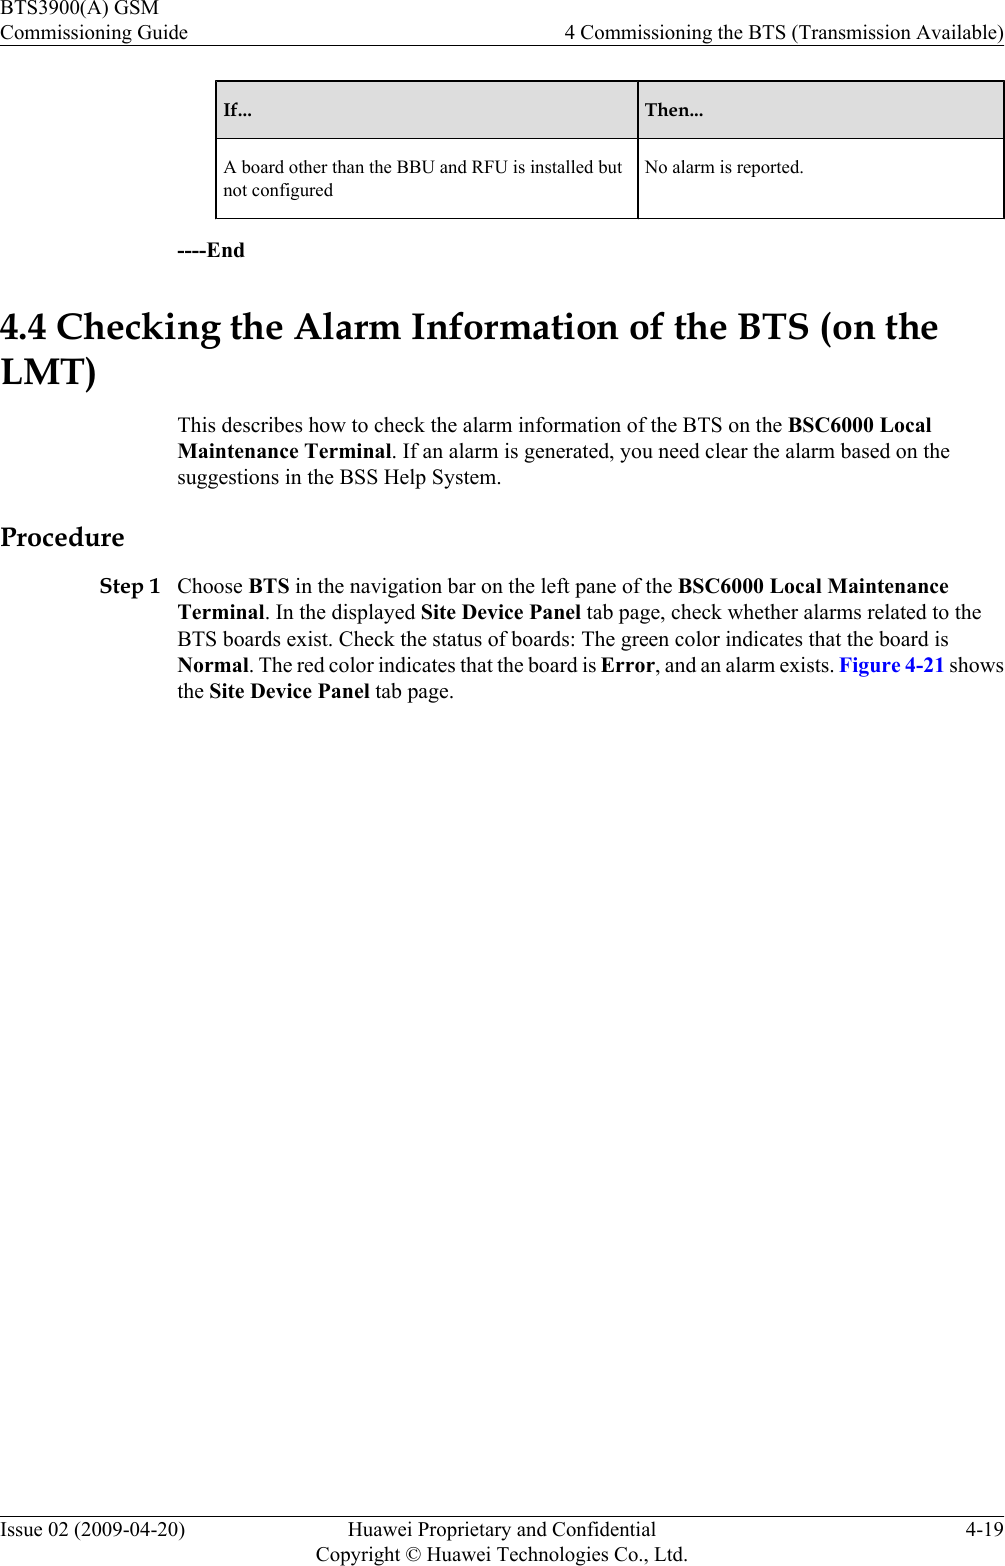 If... Then...A board other than the BBU and RFU is installed butnot configuredNo alarm is reported.----End4.4 Checking the Alarm Information of the BTS (on theLMT)This describes how to check the alarm information of the BTS on the BSC6000 LocalMaintenance Terminal. If an alarm is generated, you need clear the alarm based on thesuggestions in the BSS Help System.ProcedureStep 1 Choose BTS in the navigation bar on the left pane of the BSC6000 Local MaintenanceTerminal. In the displayed Site Device Panel tab page, check whether alarms related to theBTS boards exist. Check the status of boards: The green color indicates that the board isNormal. The red color indicates that the board is Error, and an alarm exists. Figure 4-21 showsthe Site Device Panel tab page.BTS3900(A) GSMCommissioning Guide 4 Commissioning the BTS (Transmission Available)Issue 02 (2009-04-20) Huawei Proprietary and ConfidentialCopyright © Huawei Technologies Co., Ltd.4-19